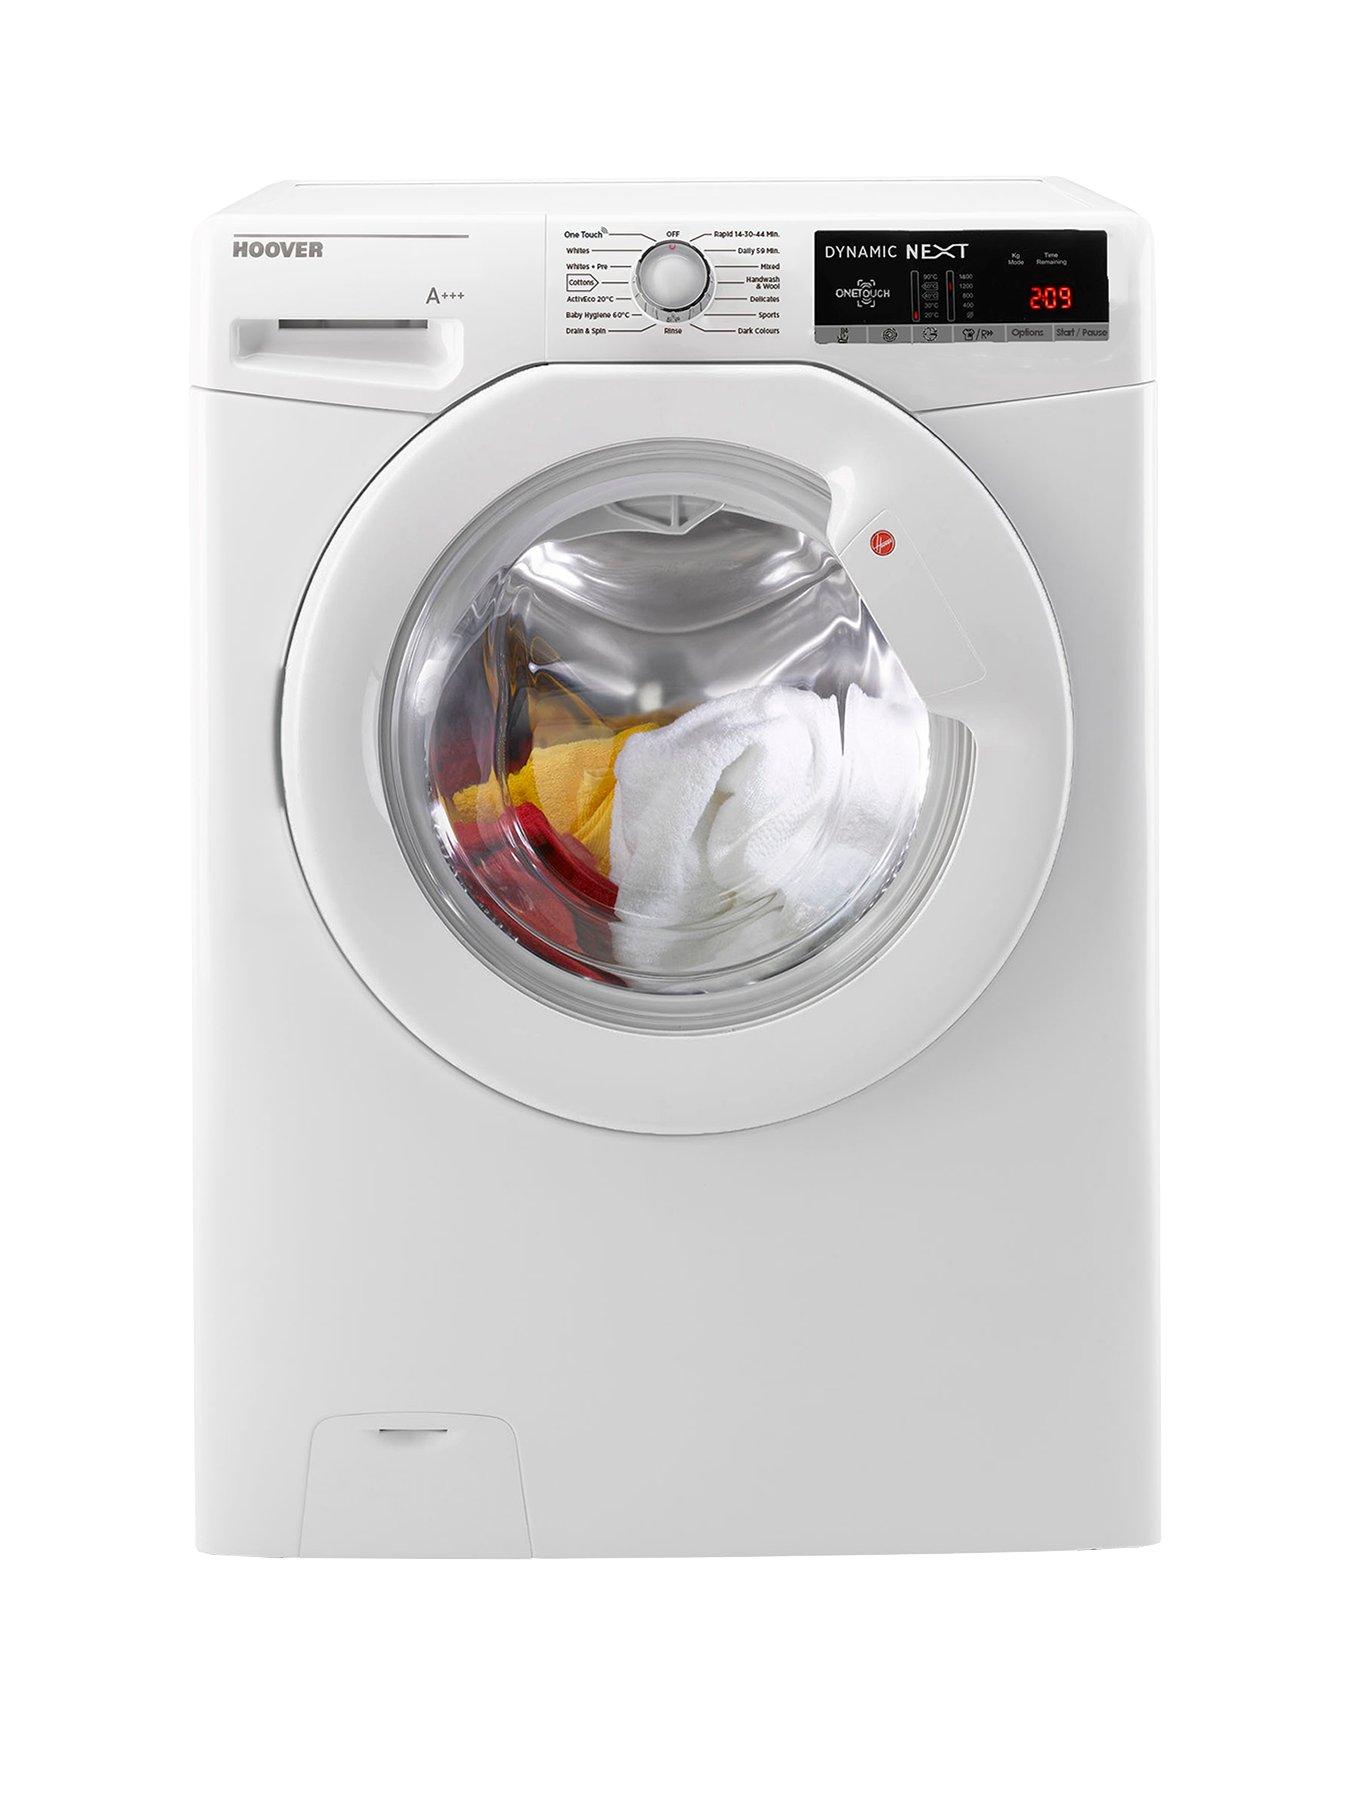 Hoover Dynamic Next Dxoa69Lw3 9Kg Load, 1600 Spin Washing Machine With One Touch – White